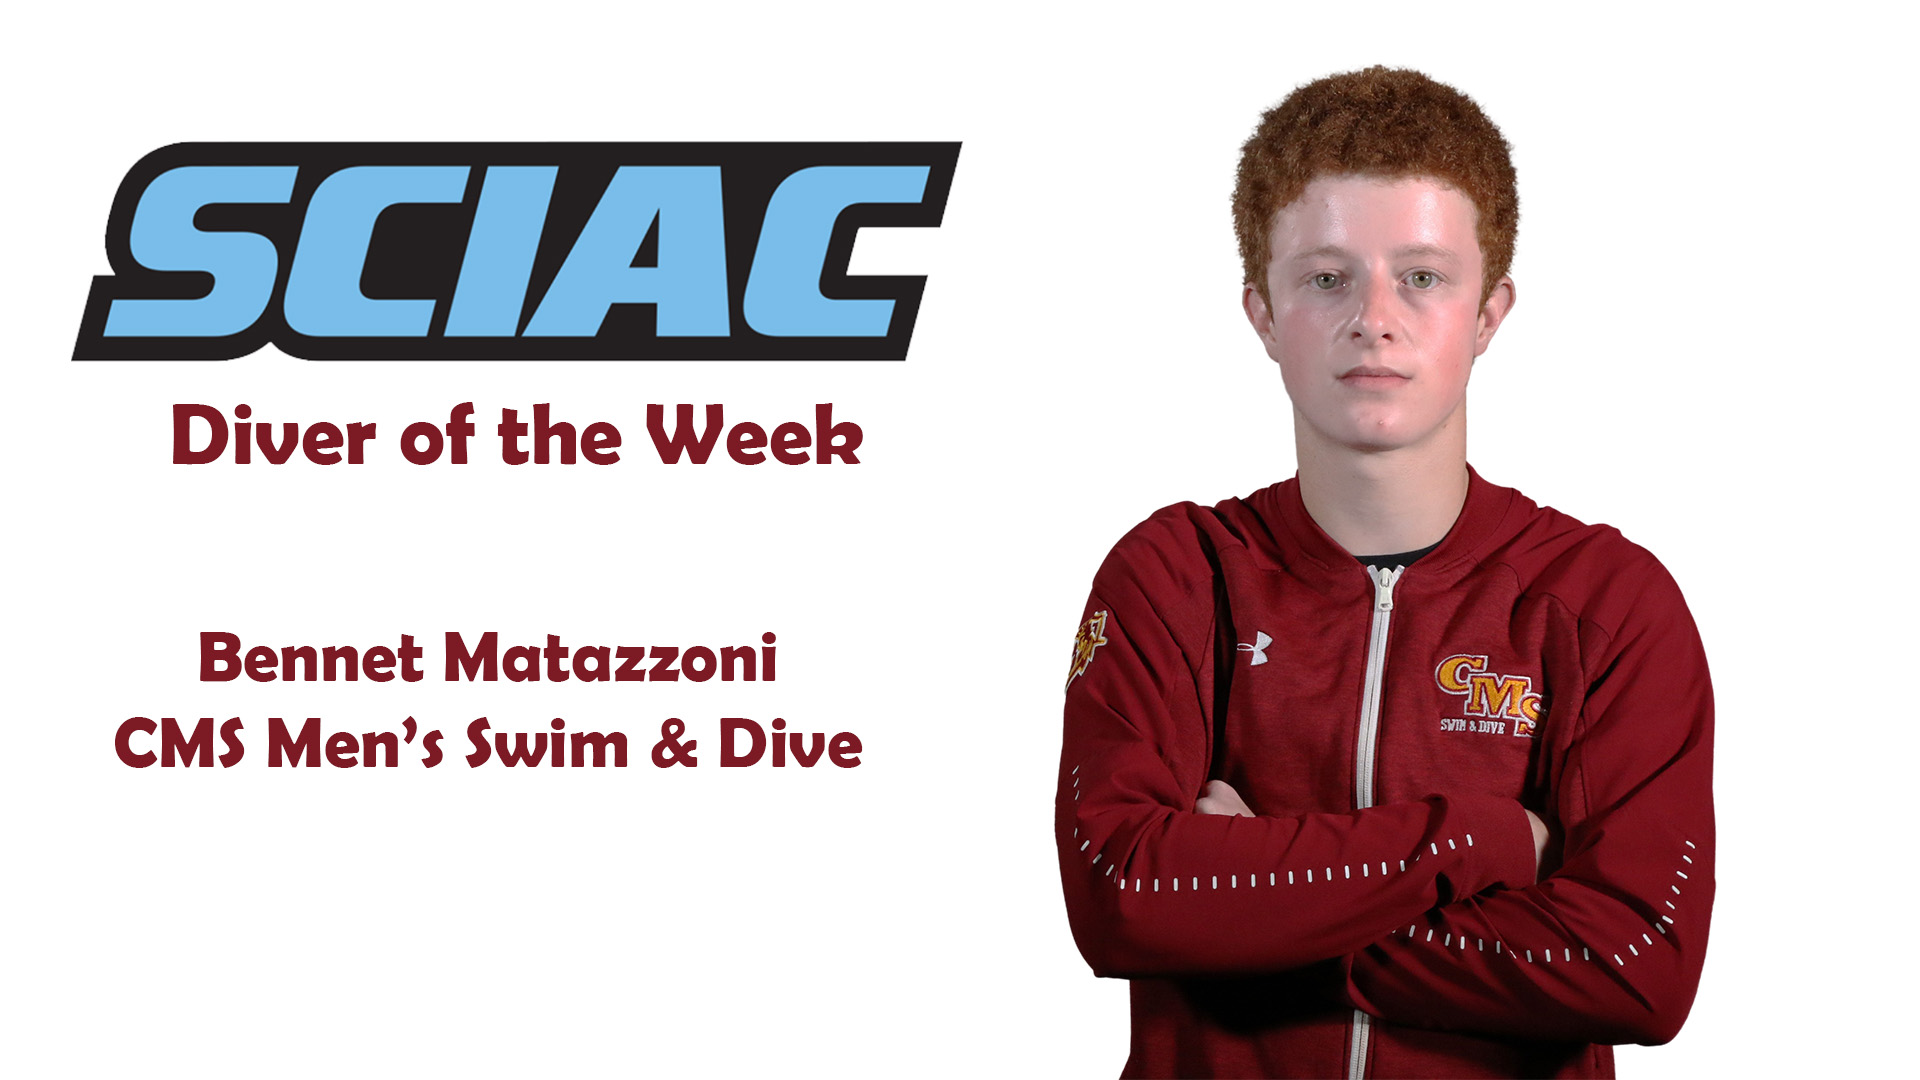 Posed shot of Bennet Matazzoni with SCIAC logo